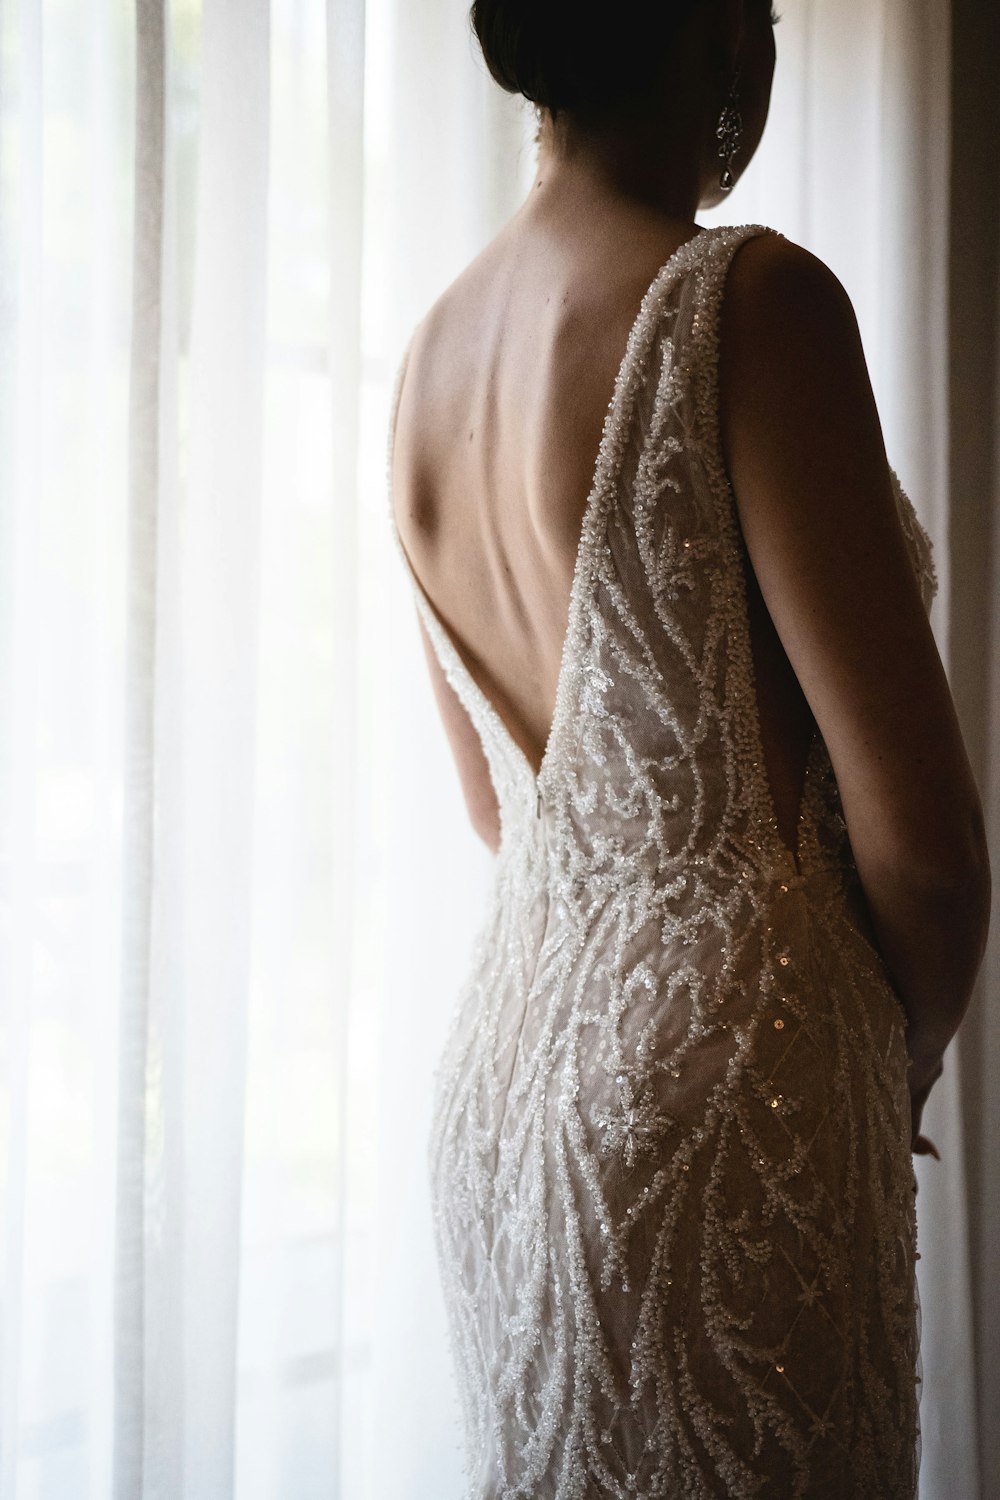 the back of a woman's dress in front of a window